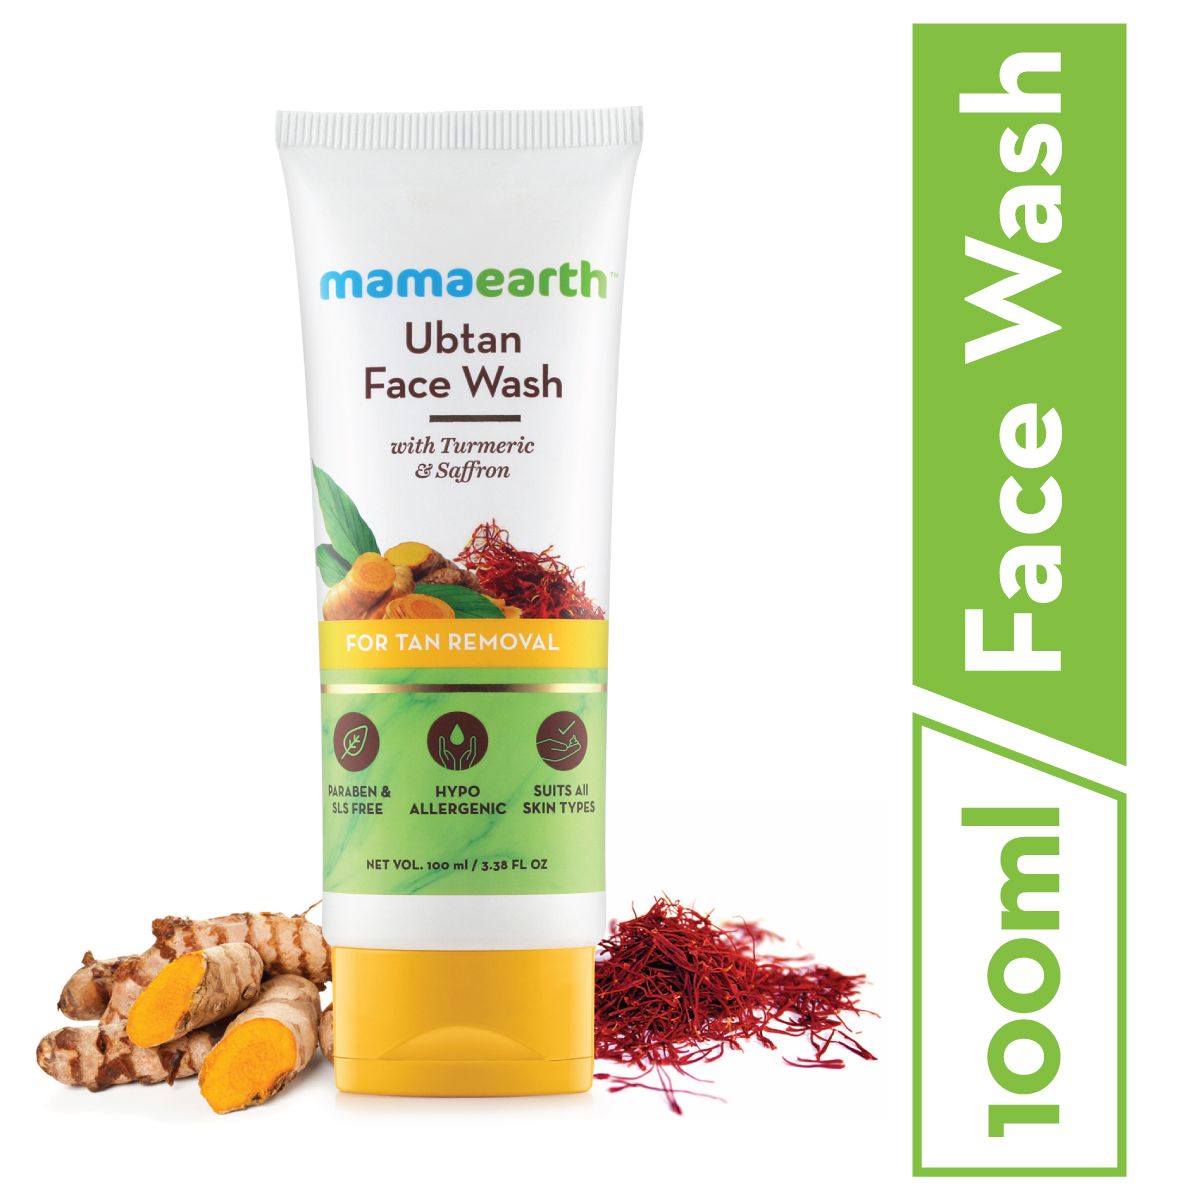 Mamaearth Ubtan Face Wash Better Than Other Options Available in the Market